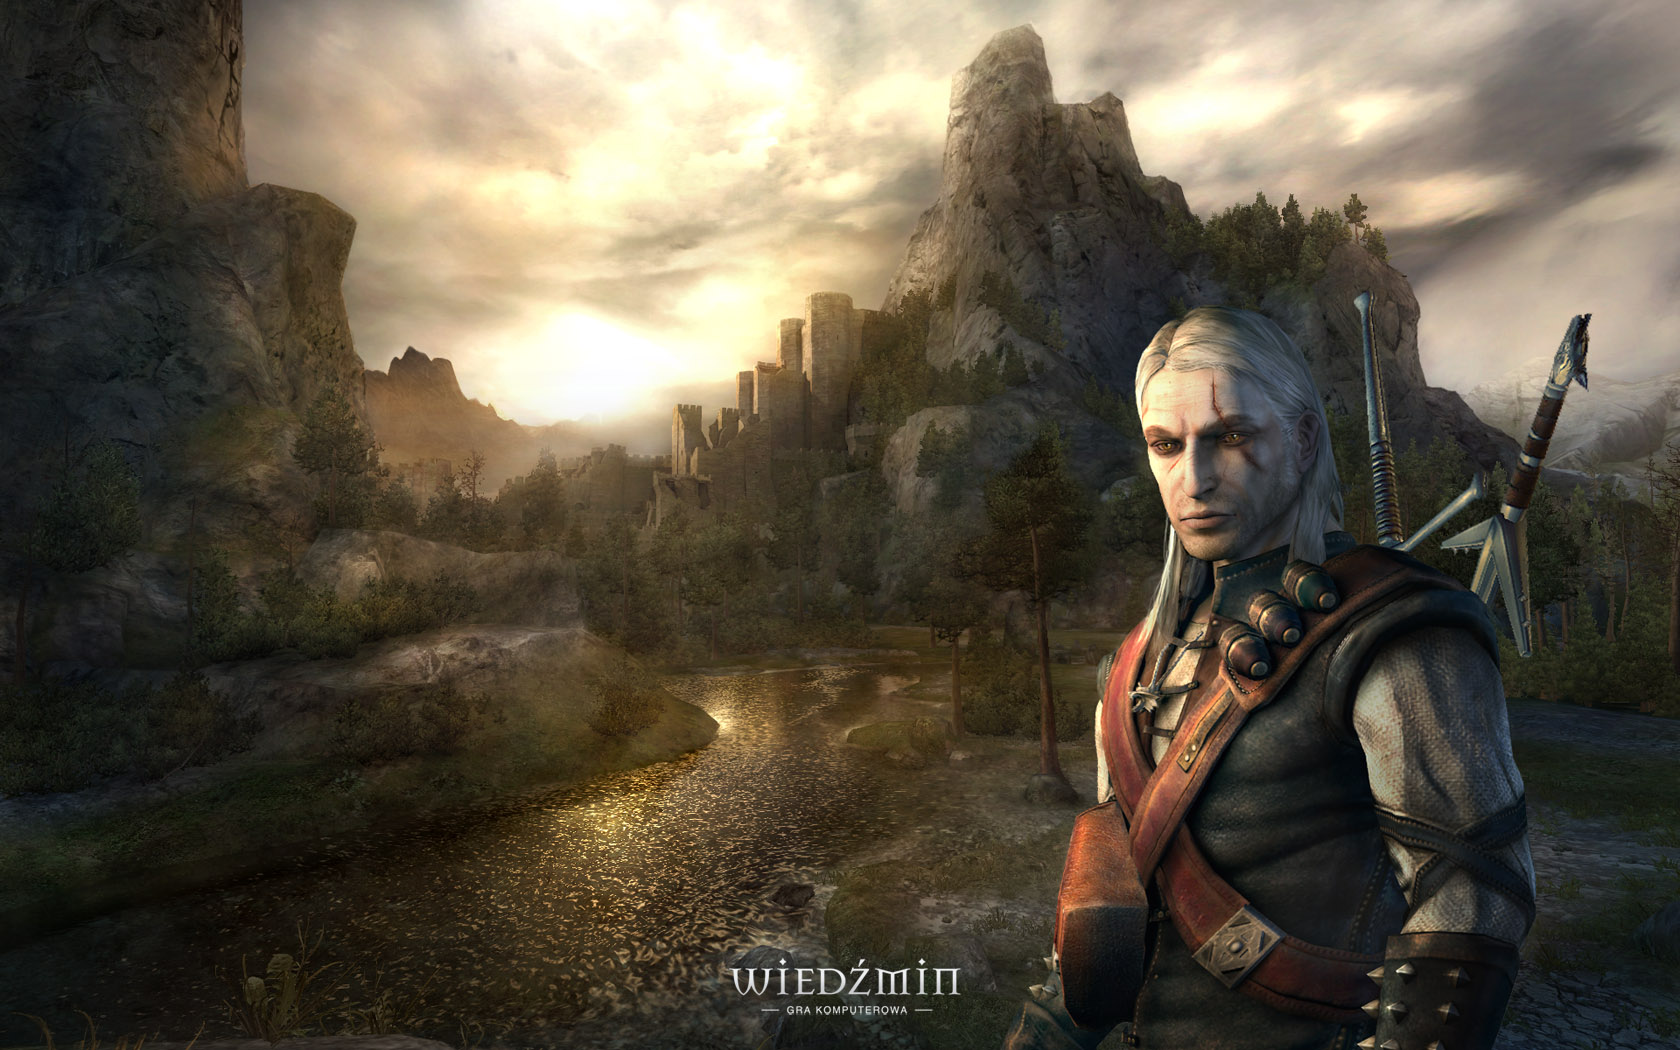 Download High quality The Witcher The Witcher wallpaper / 1680x1050